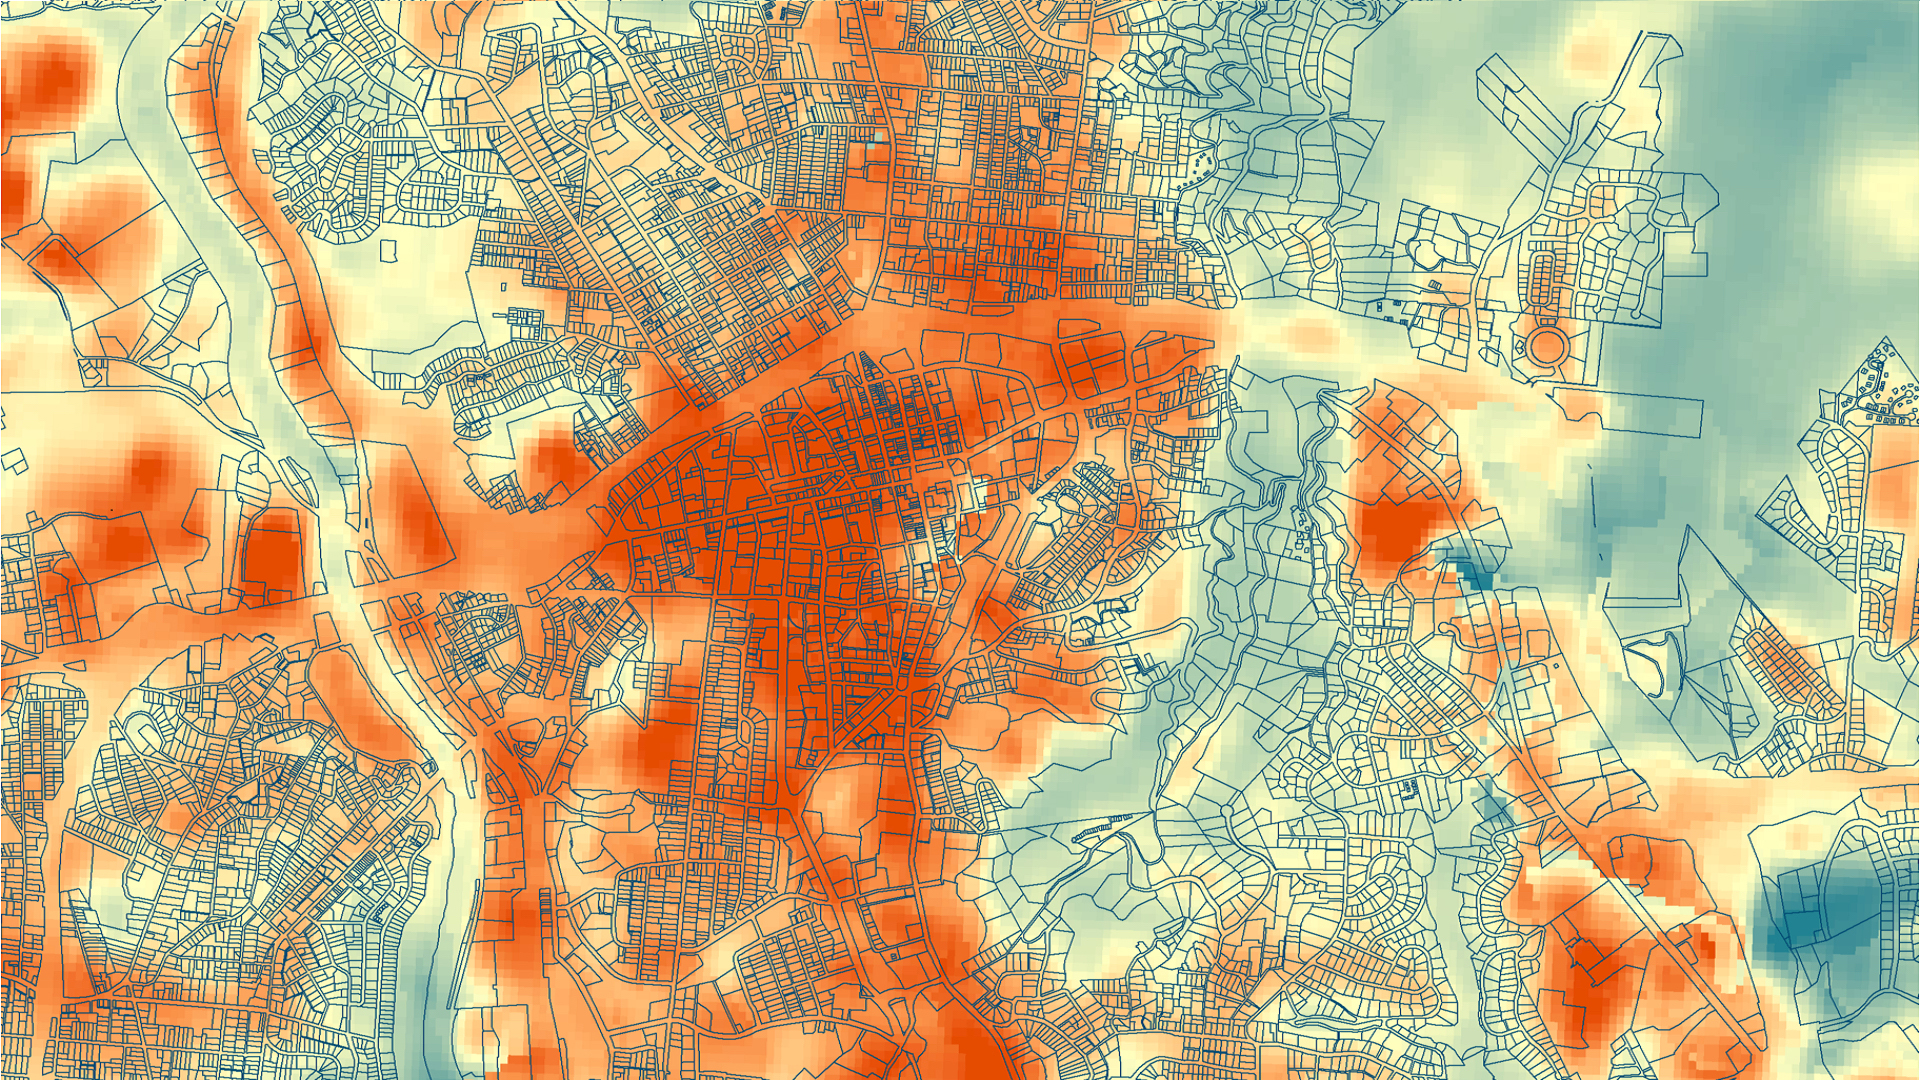 2018 summer median Land Surface Temperature (LST) derived from Landsat 8 Raw Scenes using Google Earth Engine. A section of Asheville is displayed. Red indicates areas with higher LST, and blue represents lower LST. Visualizing which communities are most vulnerable to urban heat allows the Asheville Urban Forestry Commission to make decisions about tree planting and preservation. Displayed over the LST are US census parcels outlines, available from http://us-city.census.okfn.org/dataset/parcels.  Keywords: urban heat, land surface temperature, landsat, census data